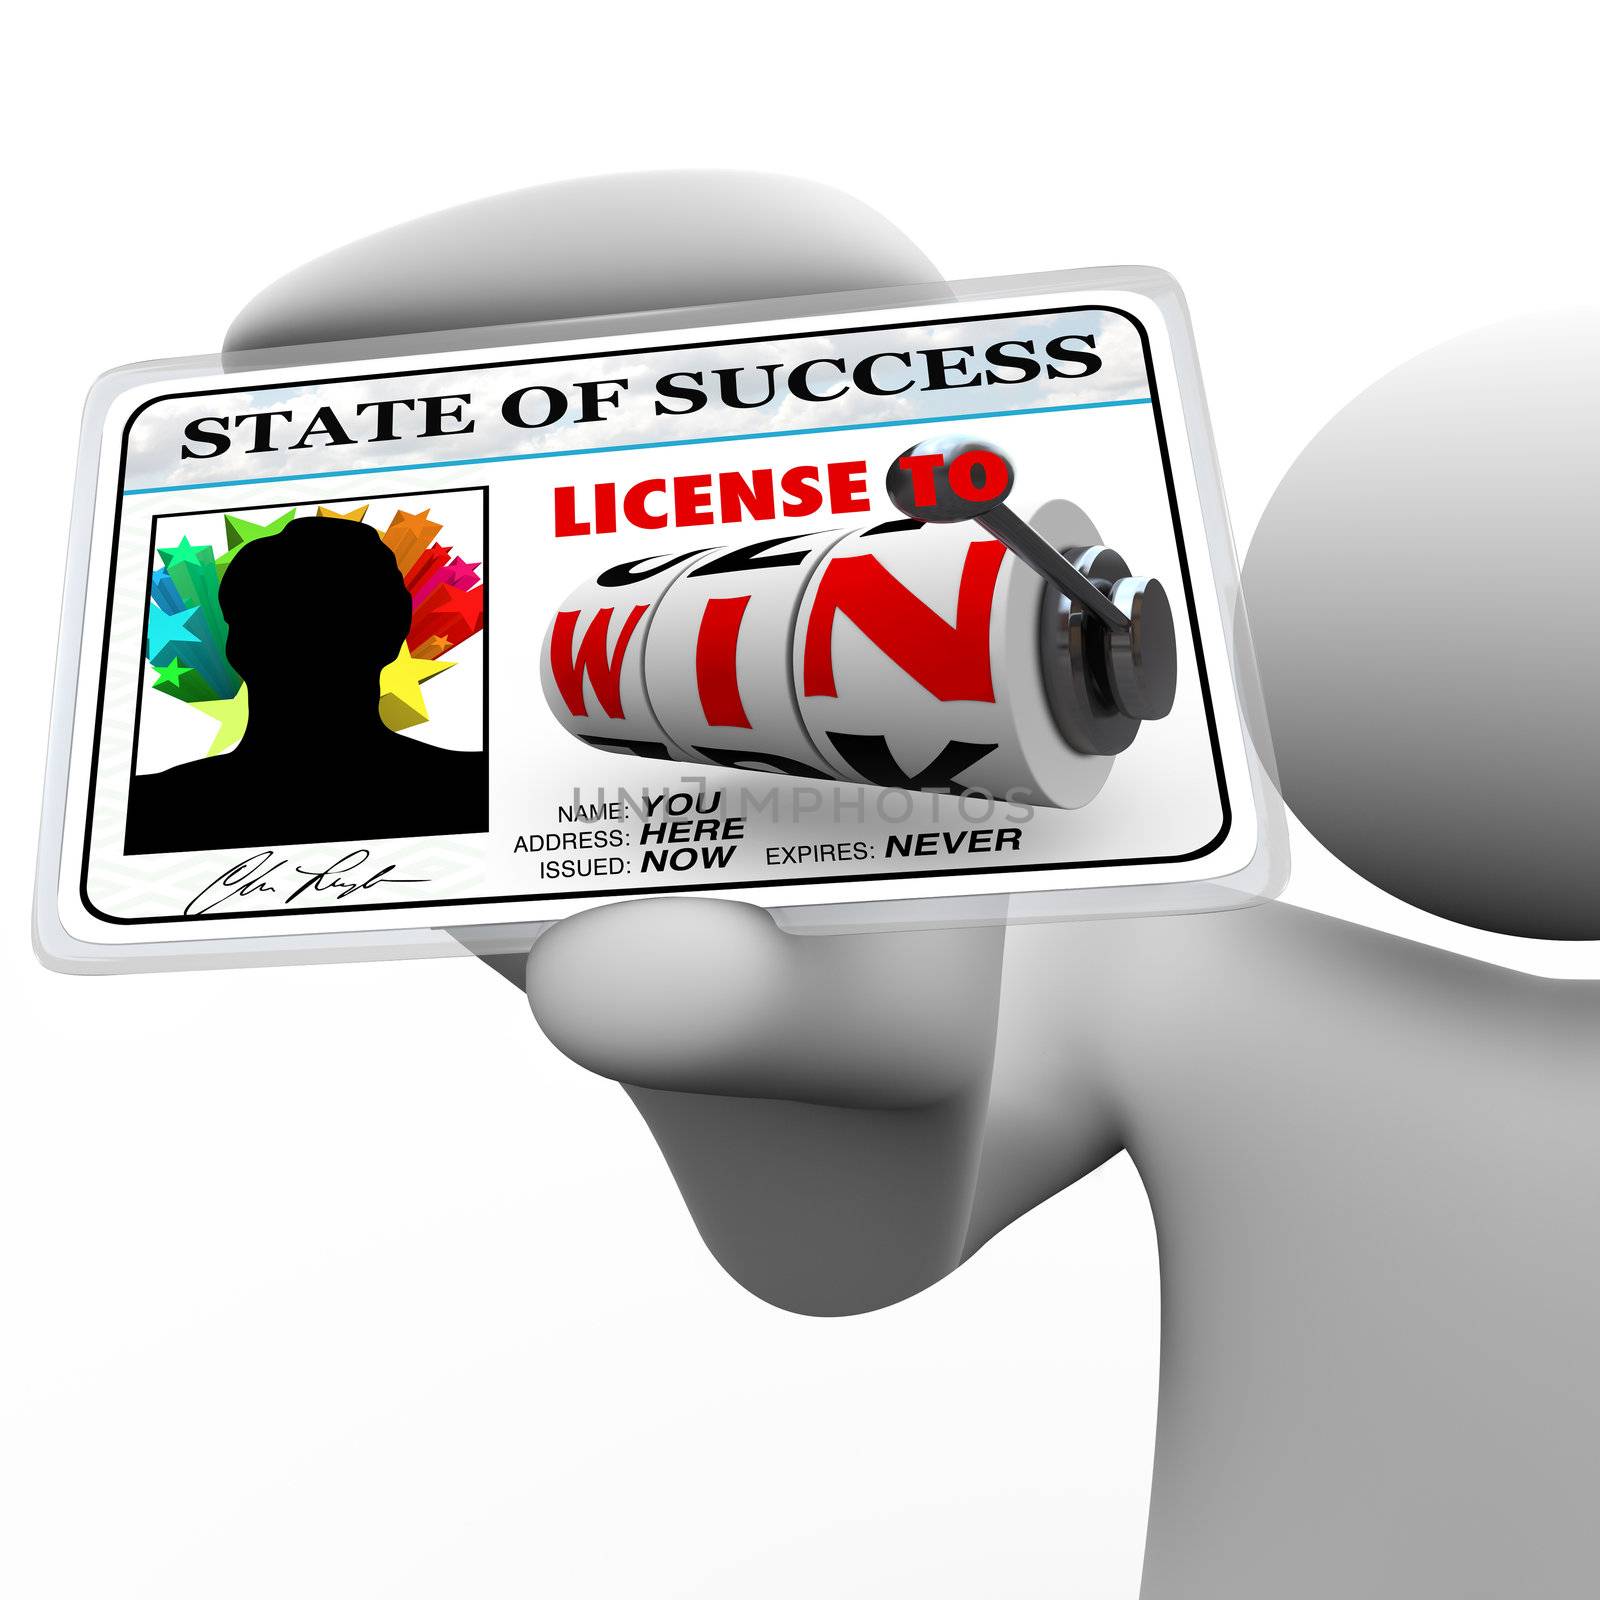 License to Win appears on this plastic laminated card as a person's access for opportunity in winning in life - business, gambling, sports or life in general